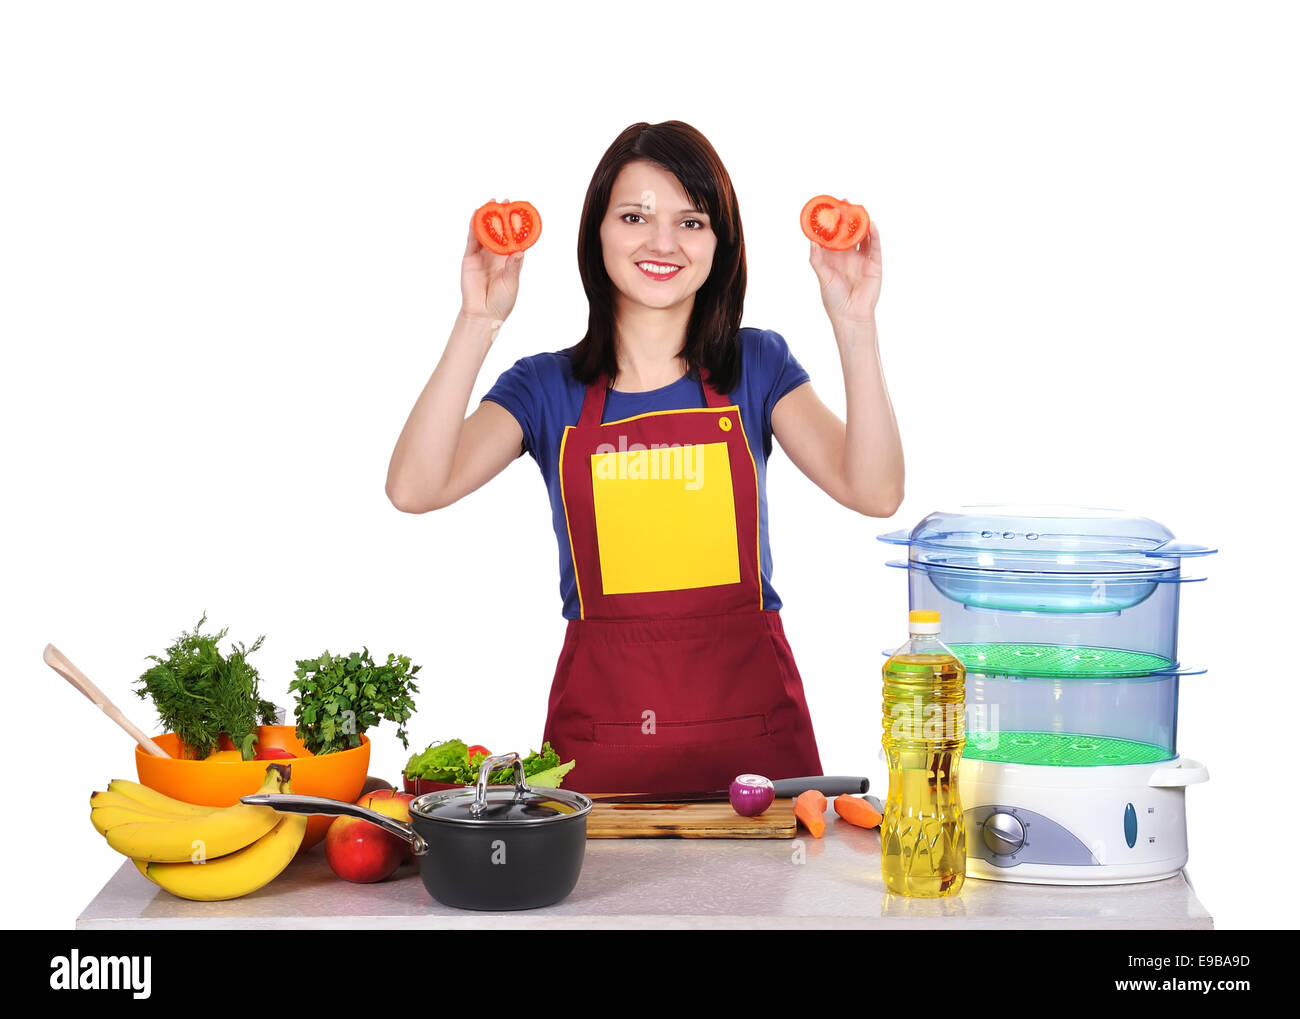 young housewife holding tomato in hand Stock Photo